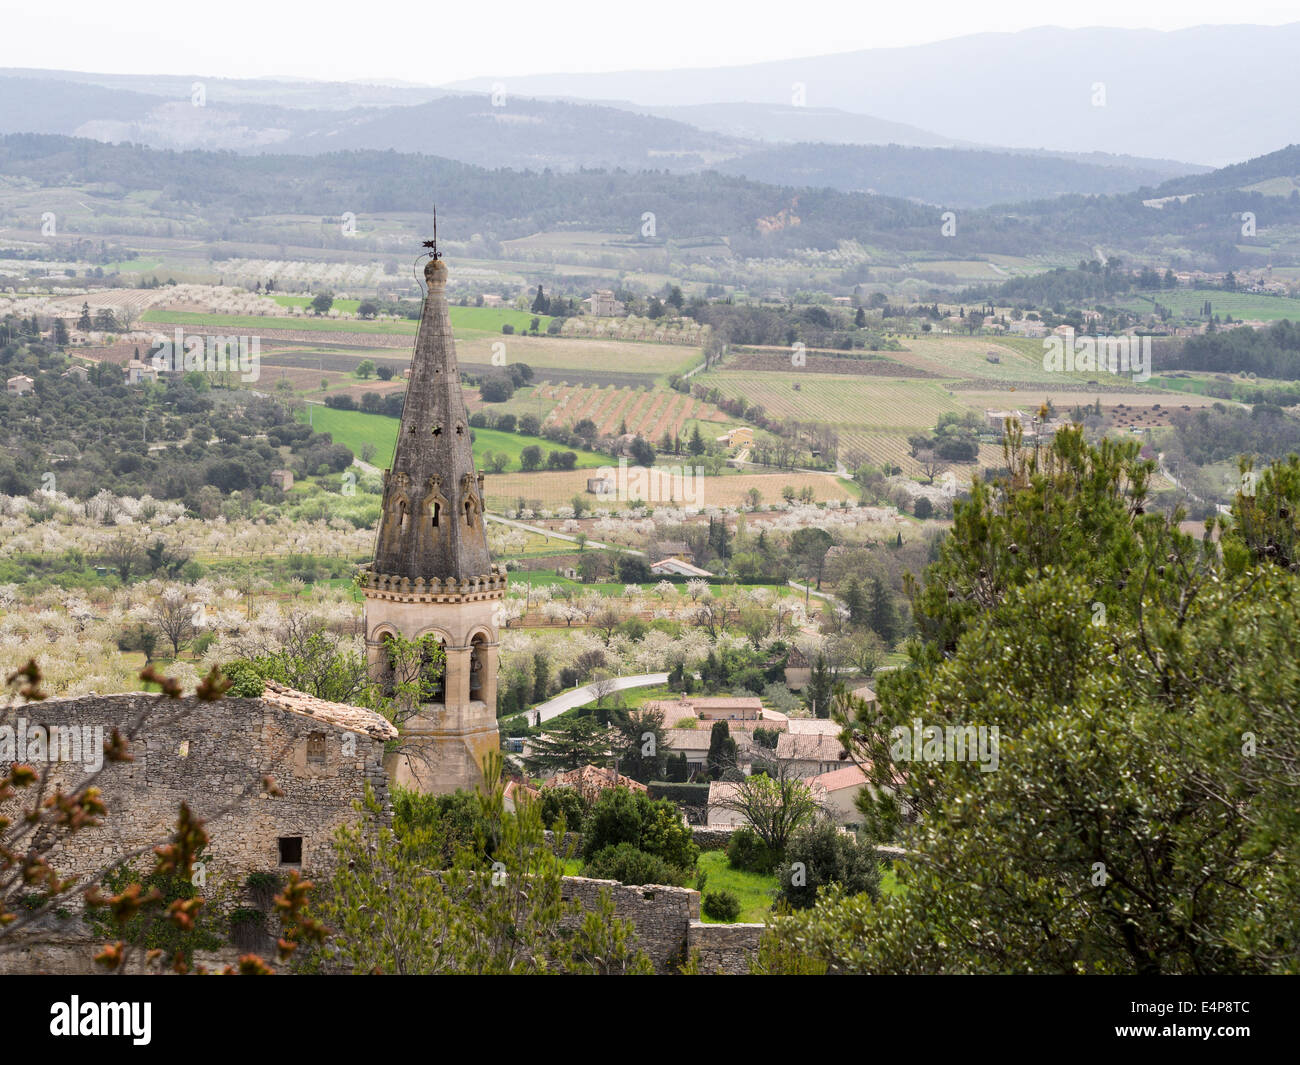 Church steeple in St-Saturnin-les -Apt. Tower of the lower village church with the valley farms, orchards and vineyards below Stock Photo